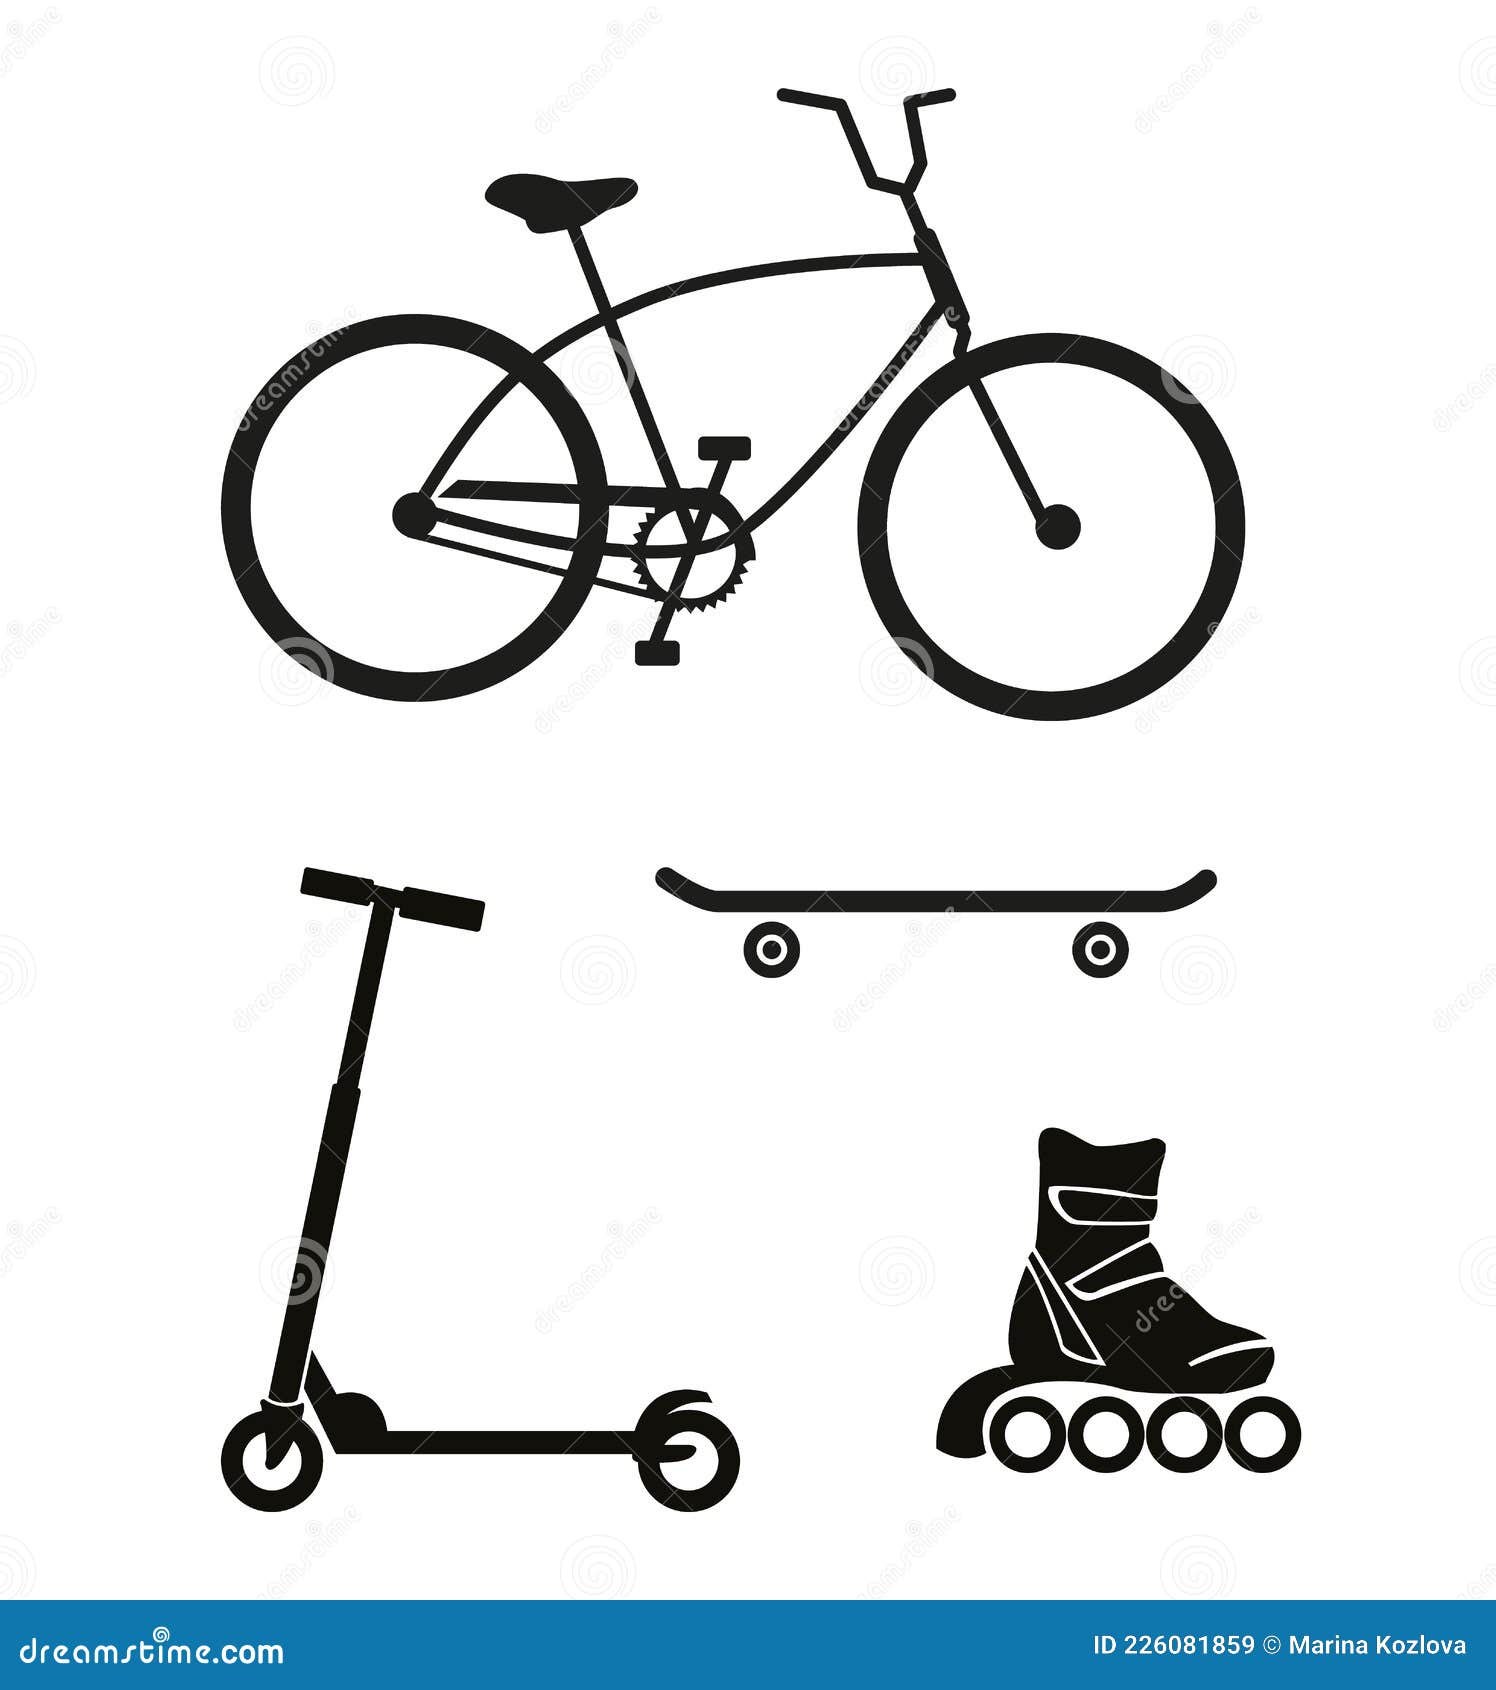 Bicycle, Skateboard, Roller Skate, Scooter - Wheeled Devices for Sport and Recreation Stock Vector - Illustration background, bicycle: 226081859